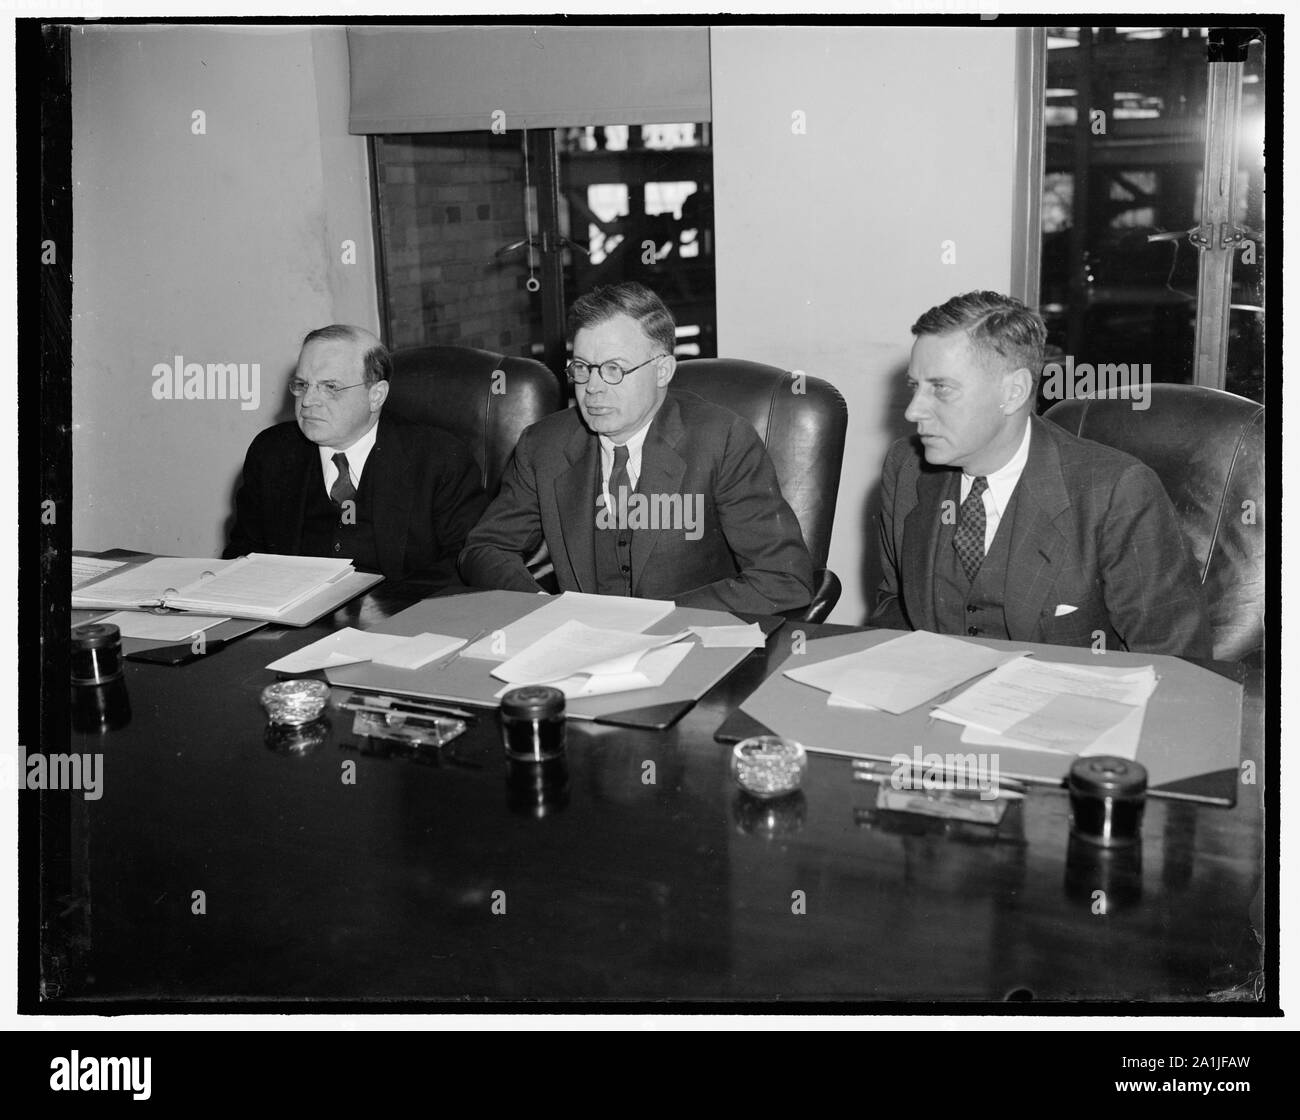 National Labor Relations Board. Washington, D.C., Dec. 22. The National Labor Relations Board, now being investigated by a Special House Committee, were snapped in this new informal picture during a hearing today. Left to right: William M. Leiserson, J. Warren Madden, Chairman, and Edwin S. Smith Stock Photo